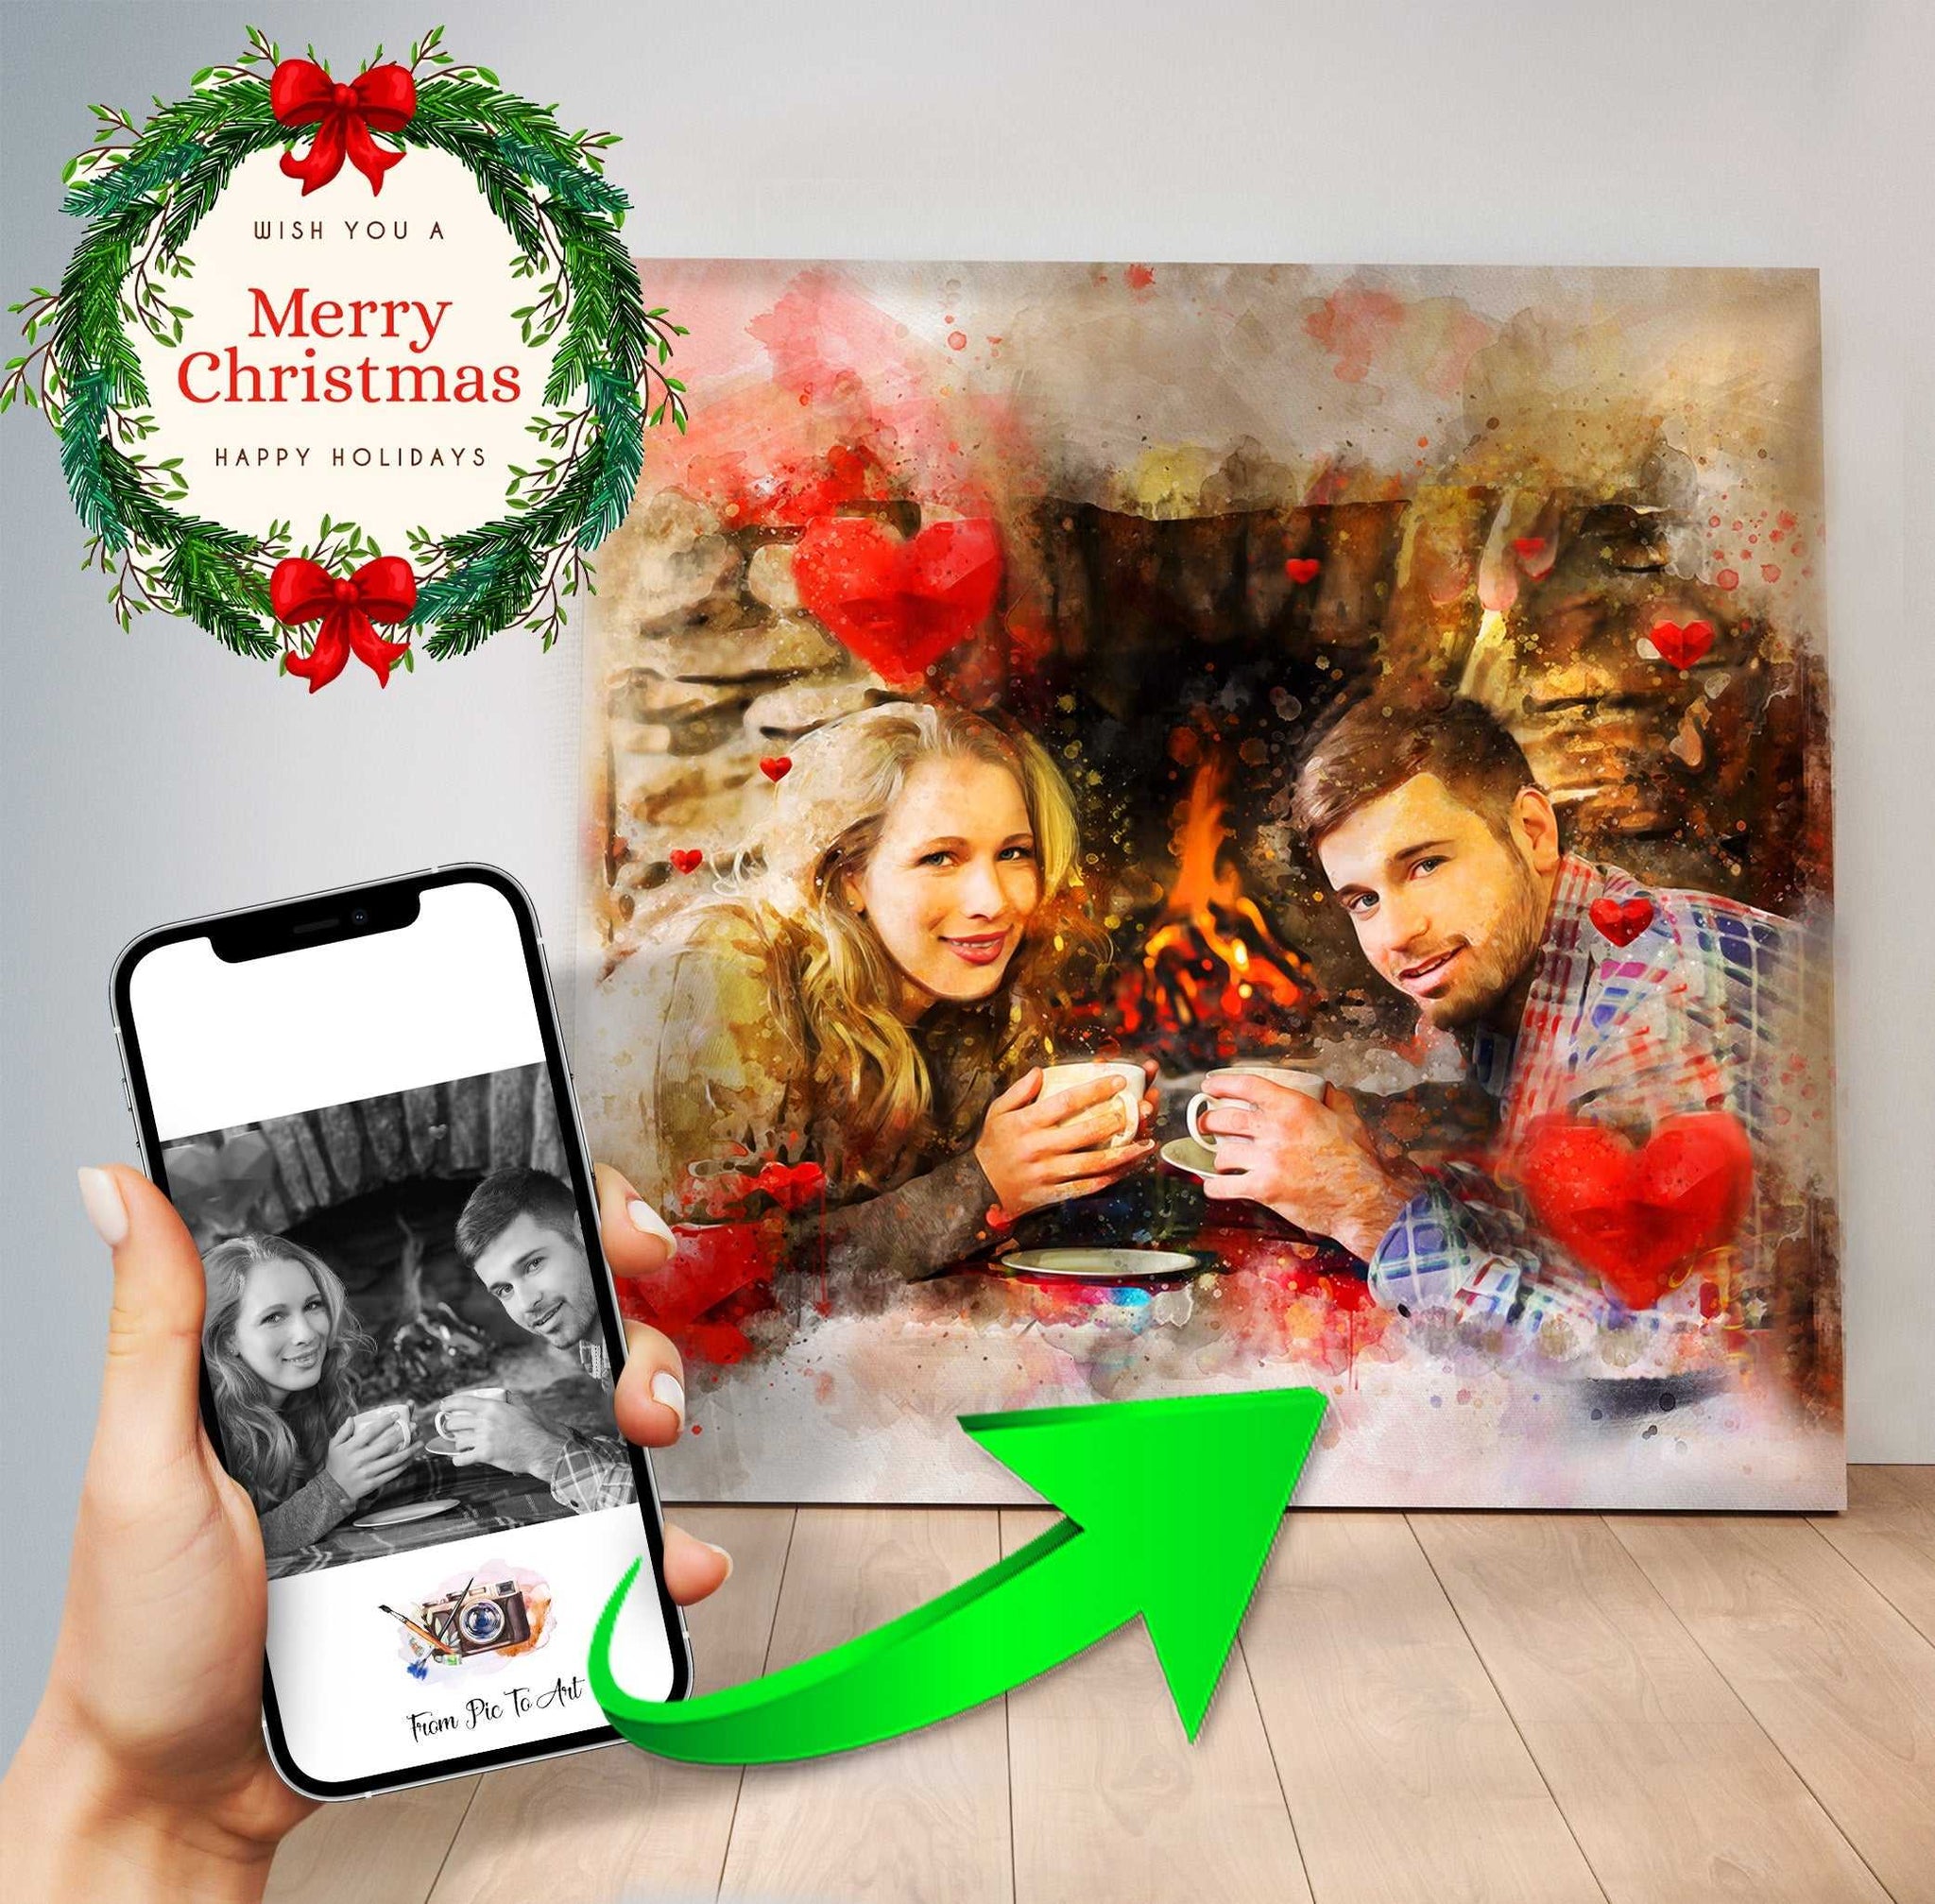 Christmas Gifts for Parents | Gift Ideas for Mom and Dad | Christmas Presents for Parents | Ideas for Christmas Gifts - FromPicToArt